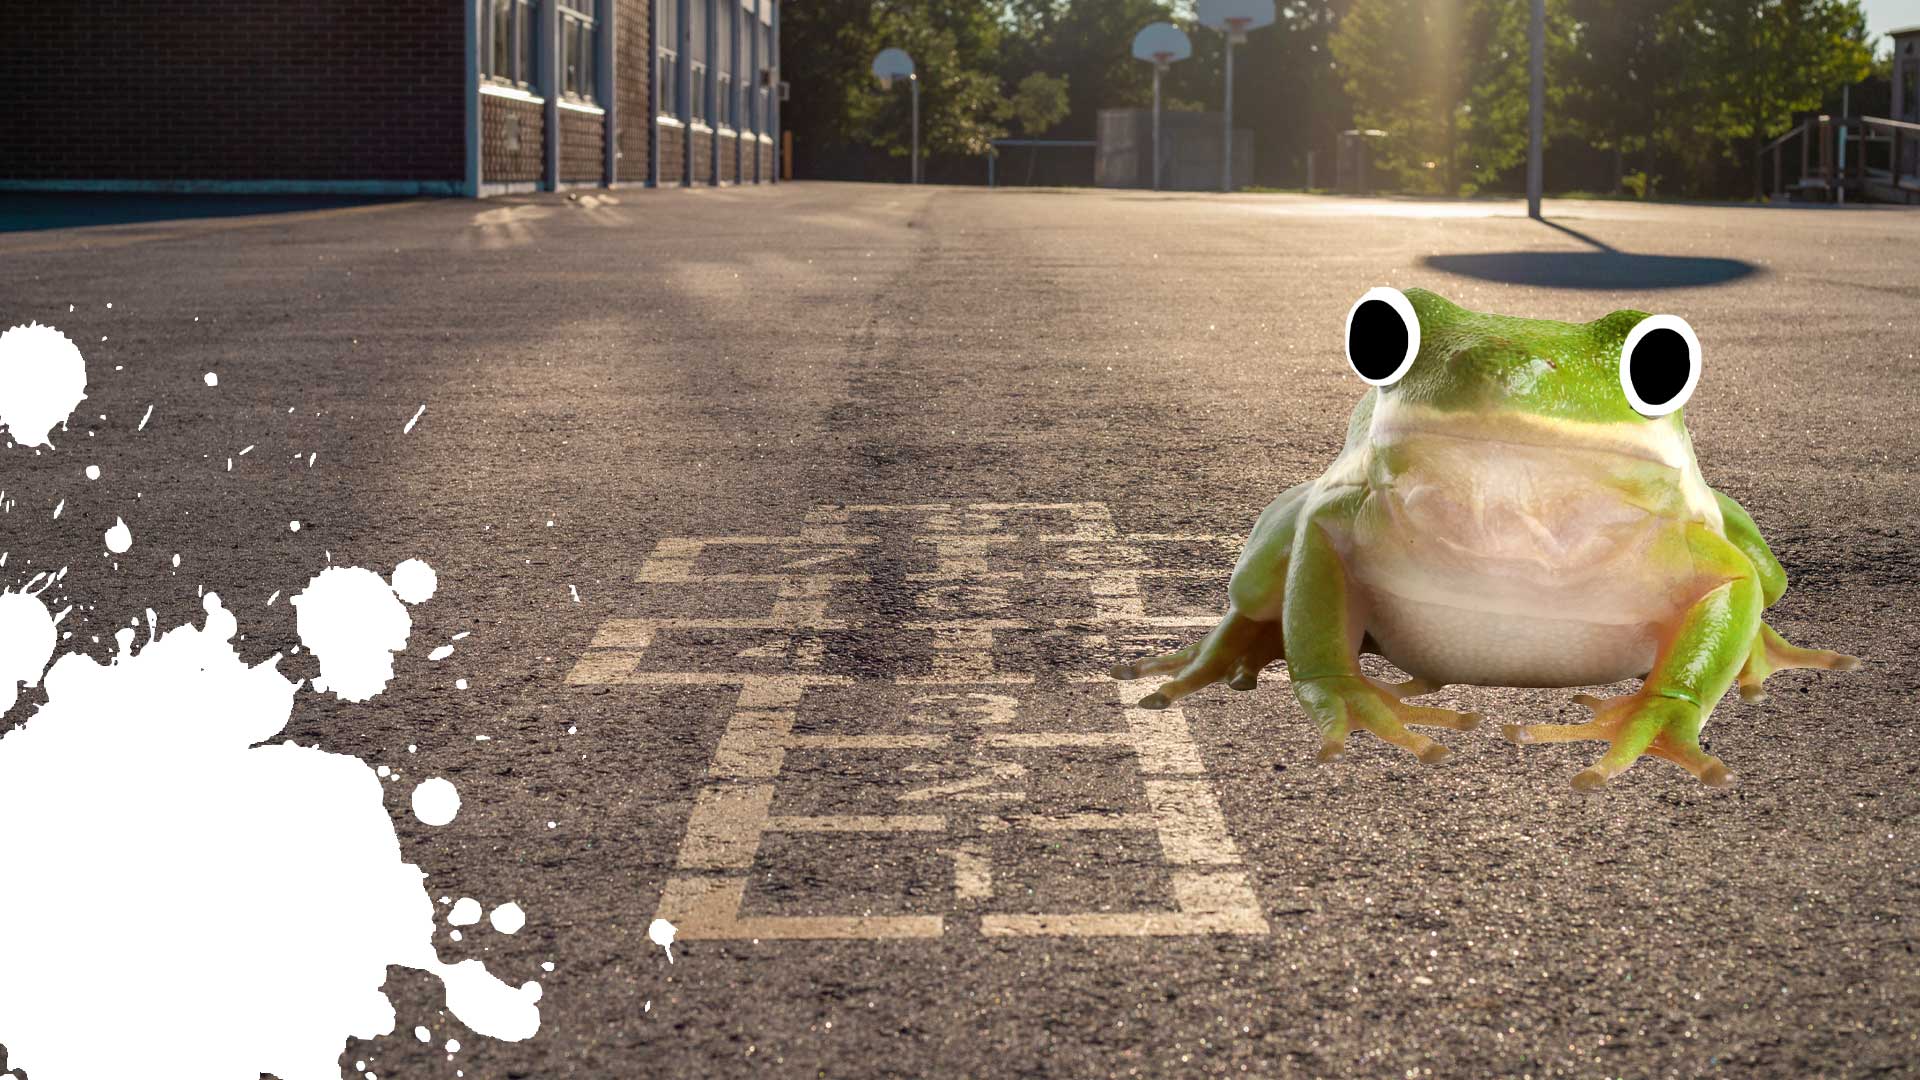 A frog in a playground